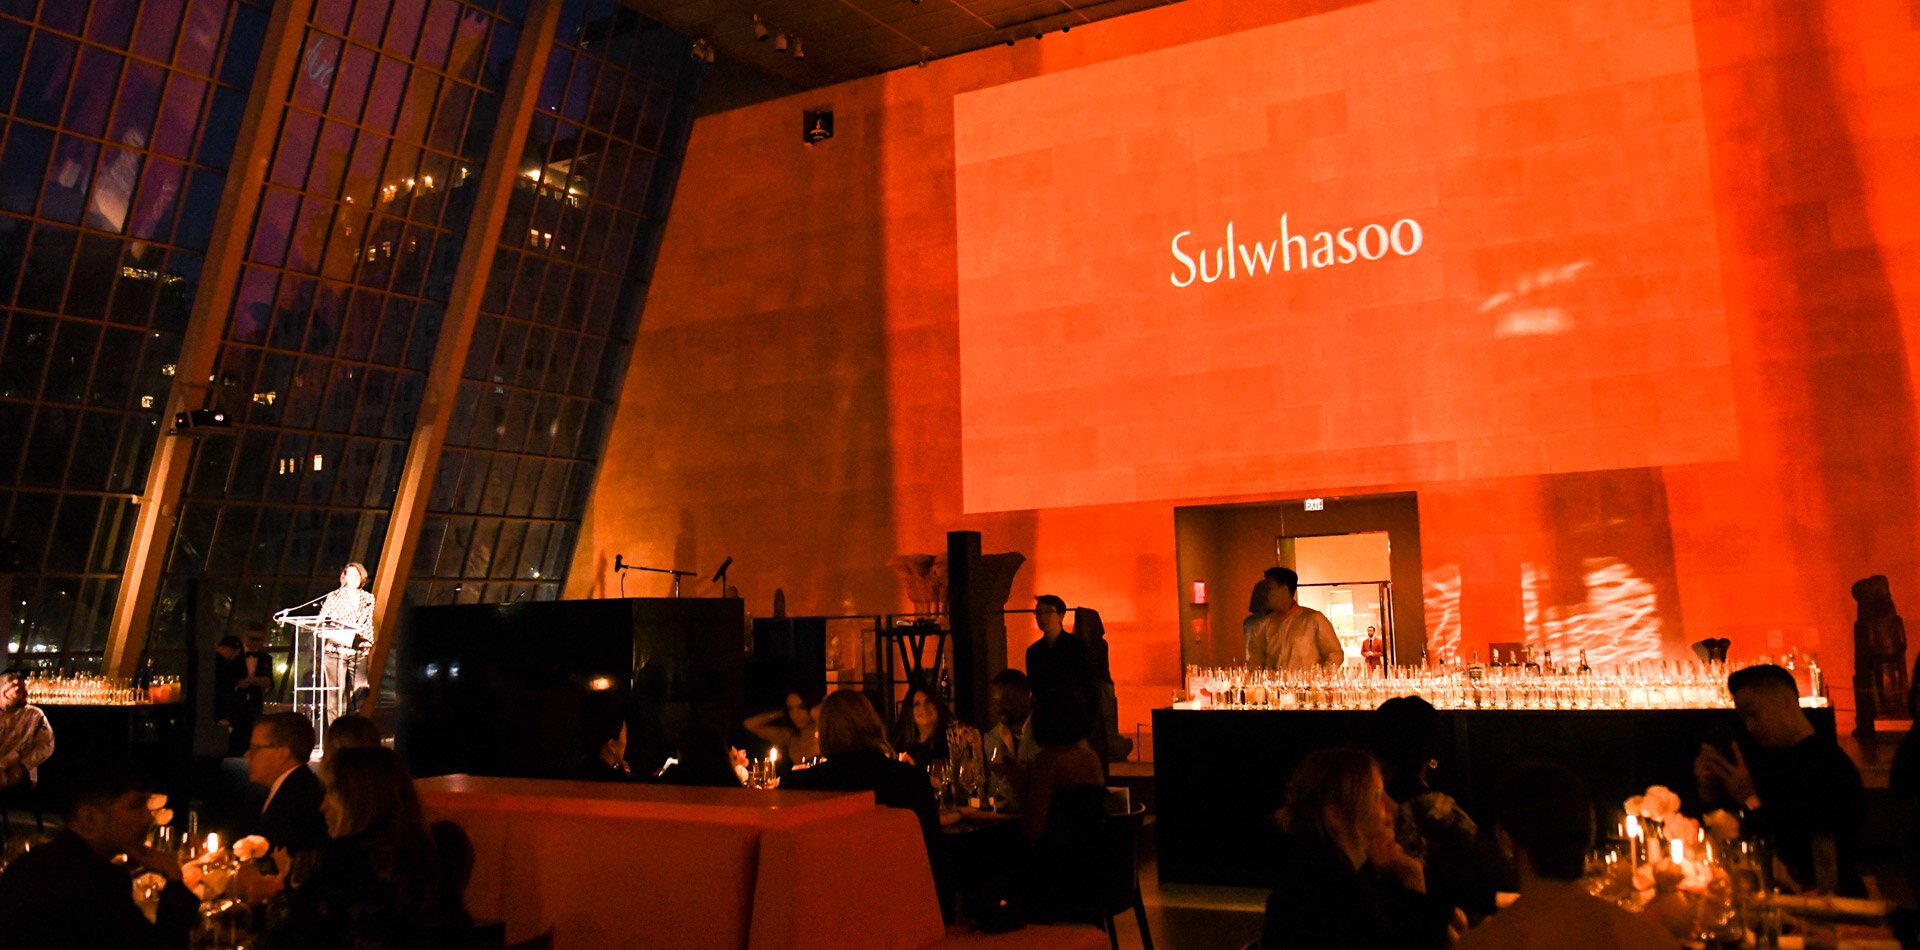 The Sulwhasoo event took place at the Metropolitan Museum of Art. - Sulwhasoo NIGHT AT THE MET